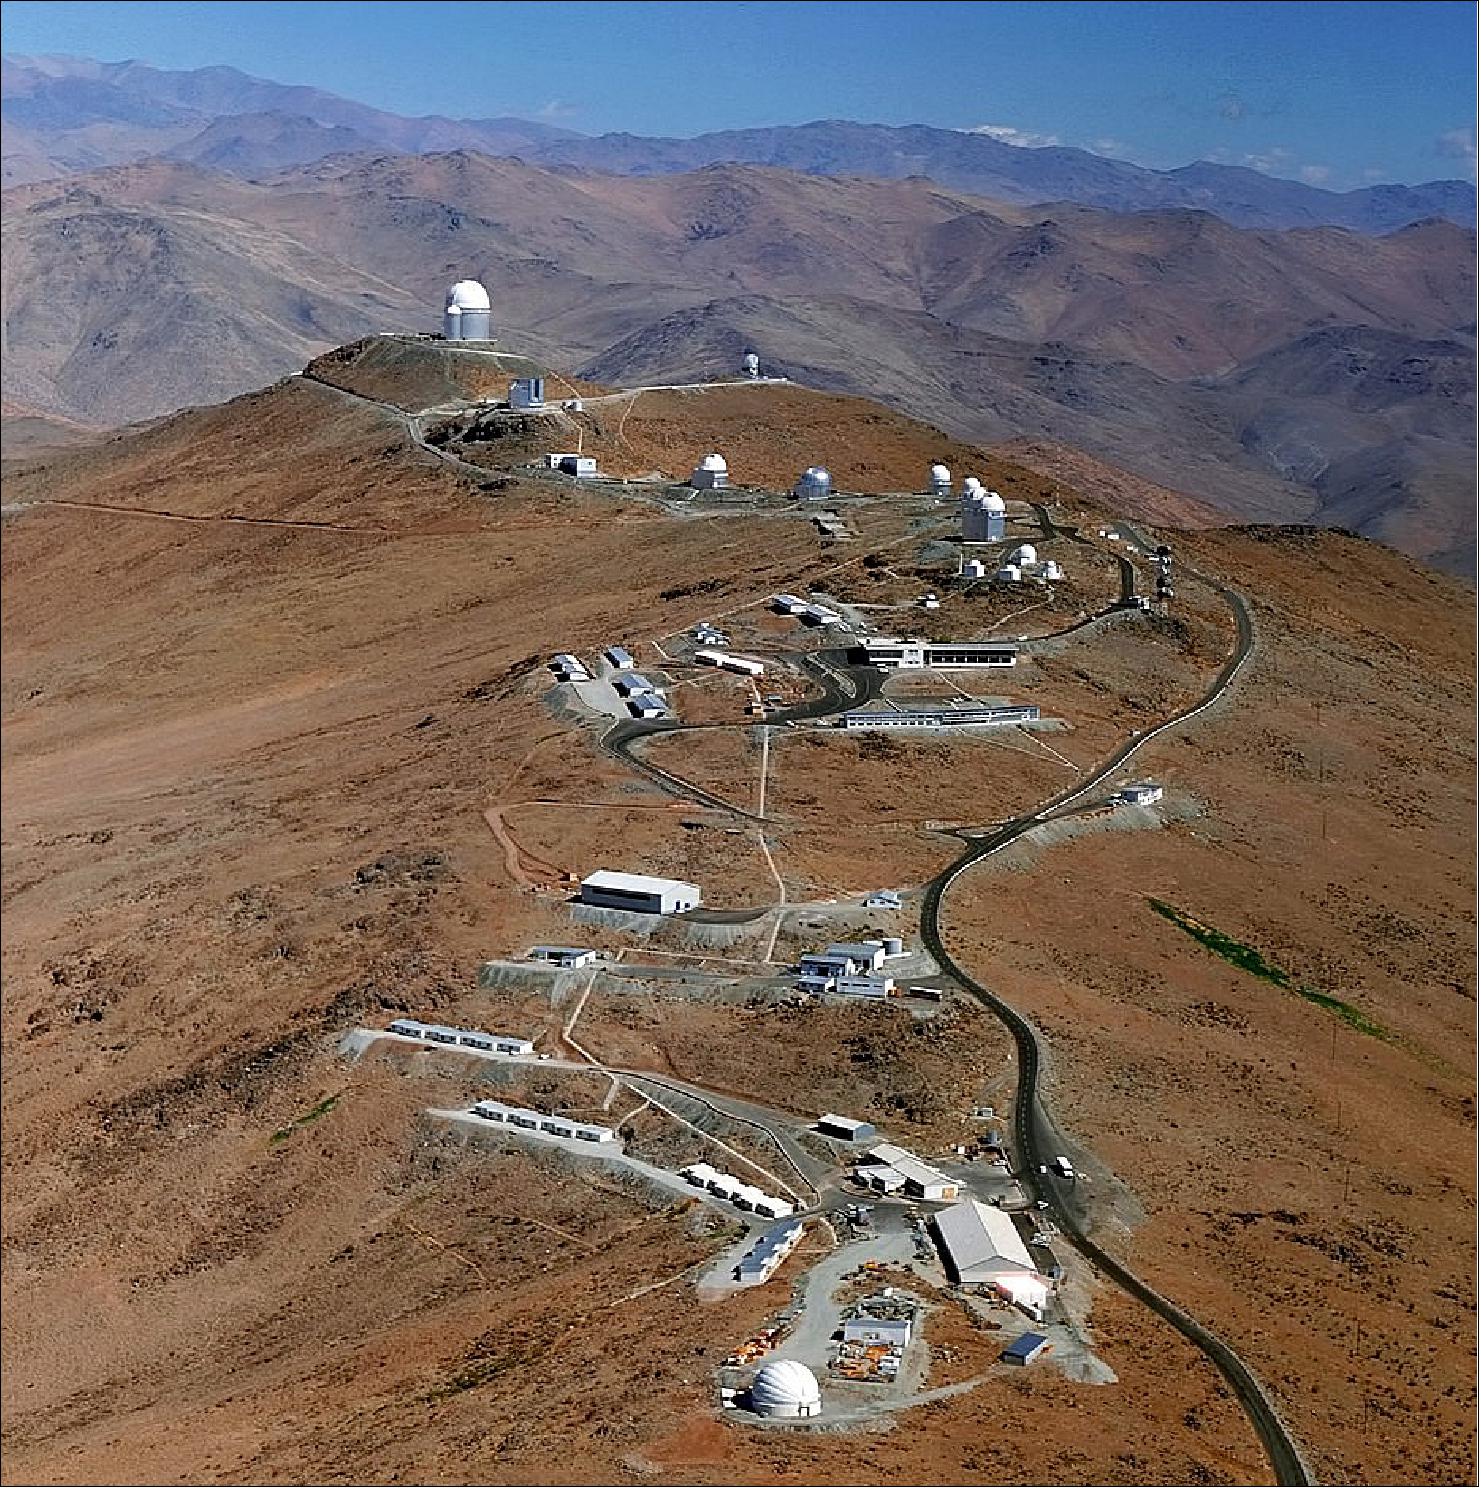 Figure 4: An aerial view of the La Silla site in Chile, ESO's original observing site, located at the outskirts of the Chilean Atacama Desert, 600 km north of Santiago de Chile and at an altitude of 2400 m (image credit: ESO, C. Madsen)